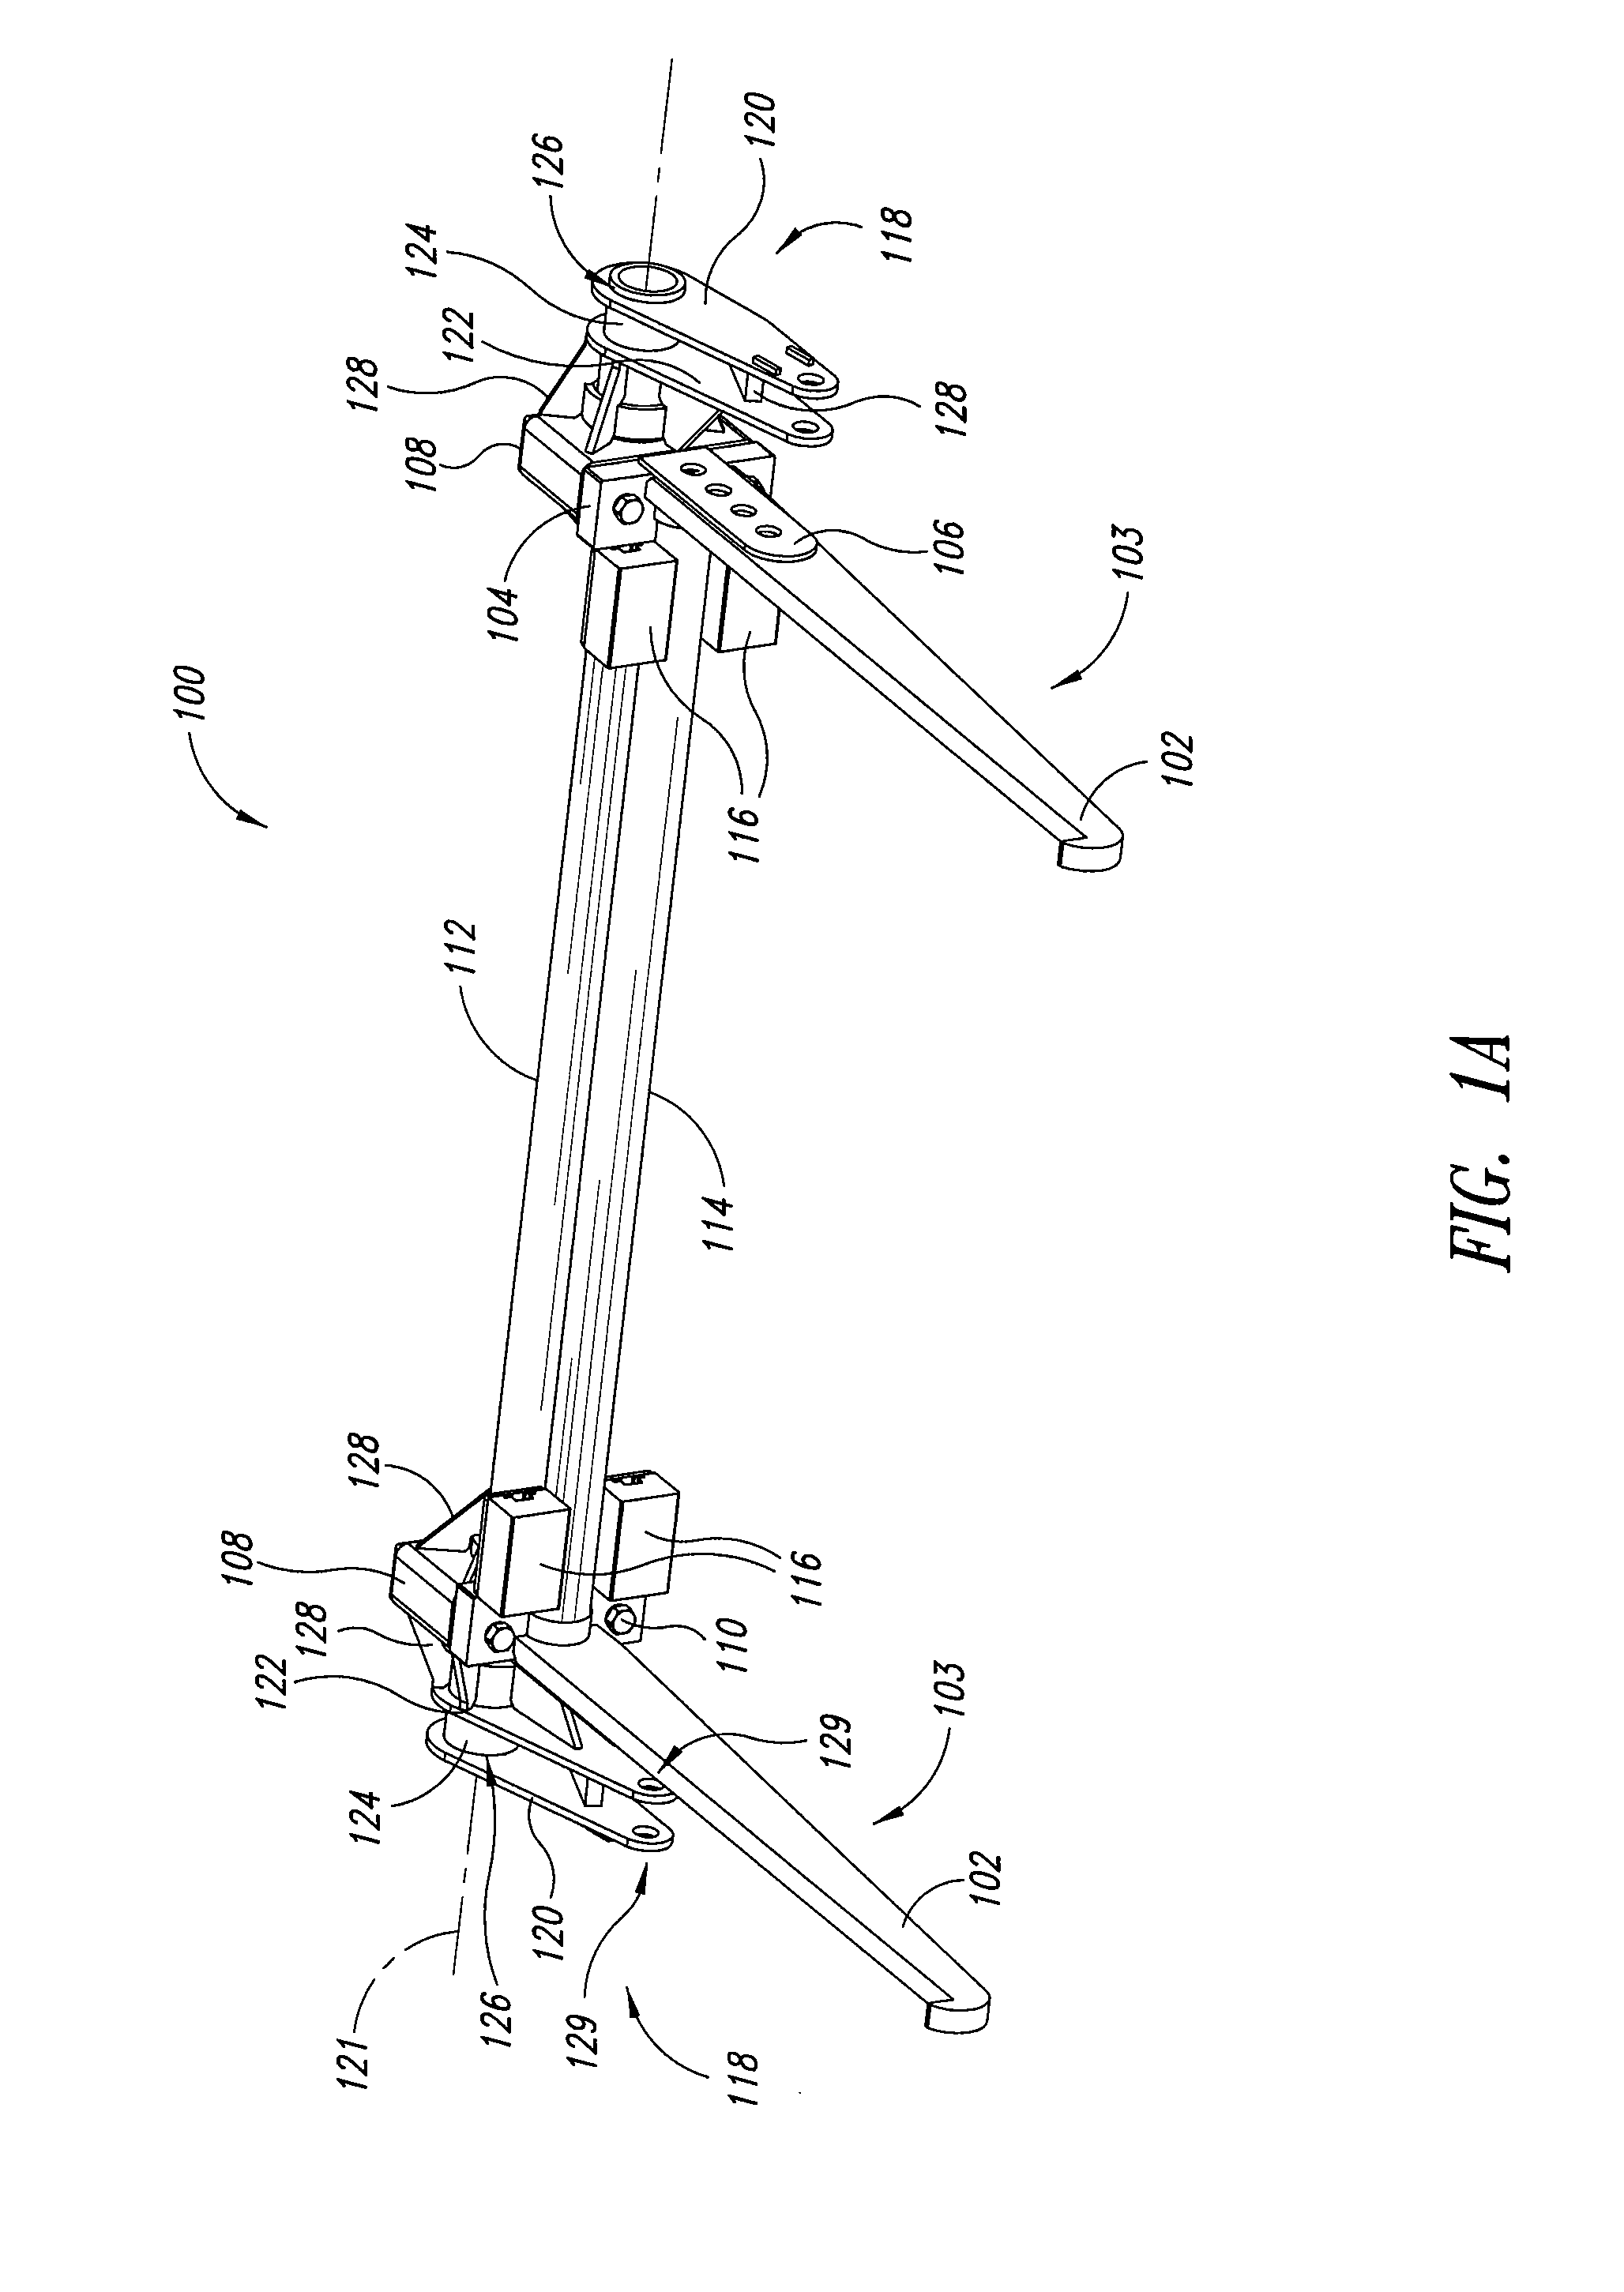 Load lift system and method